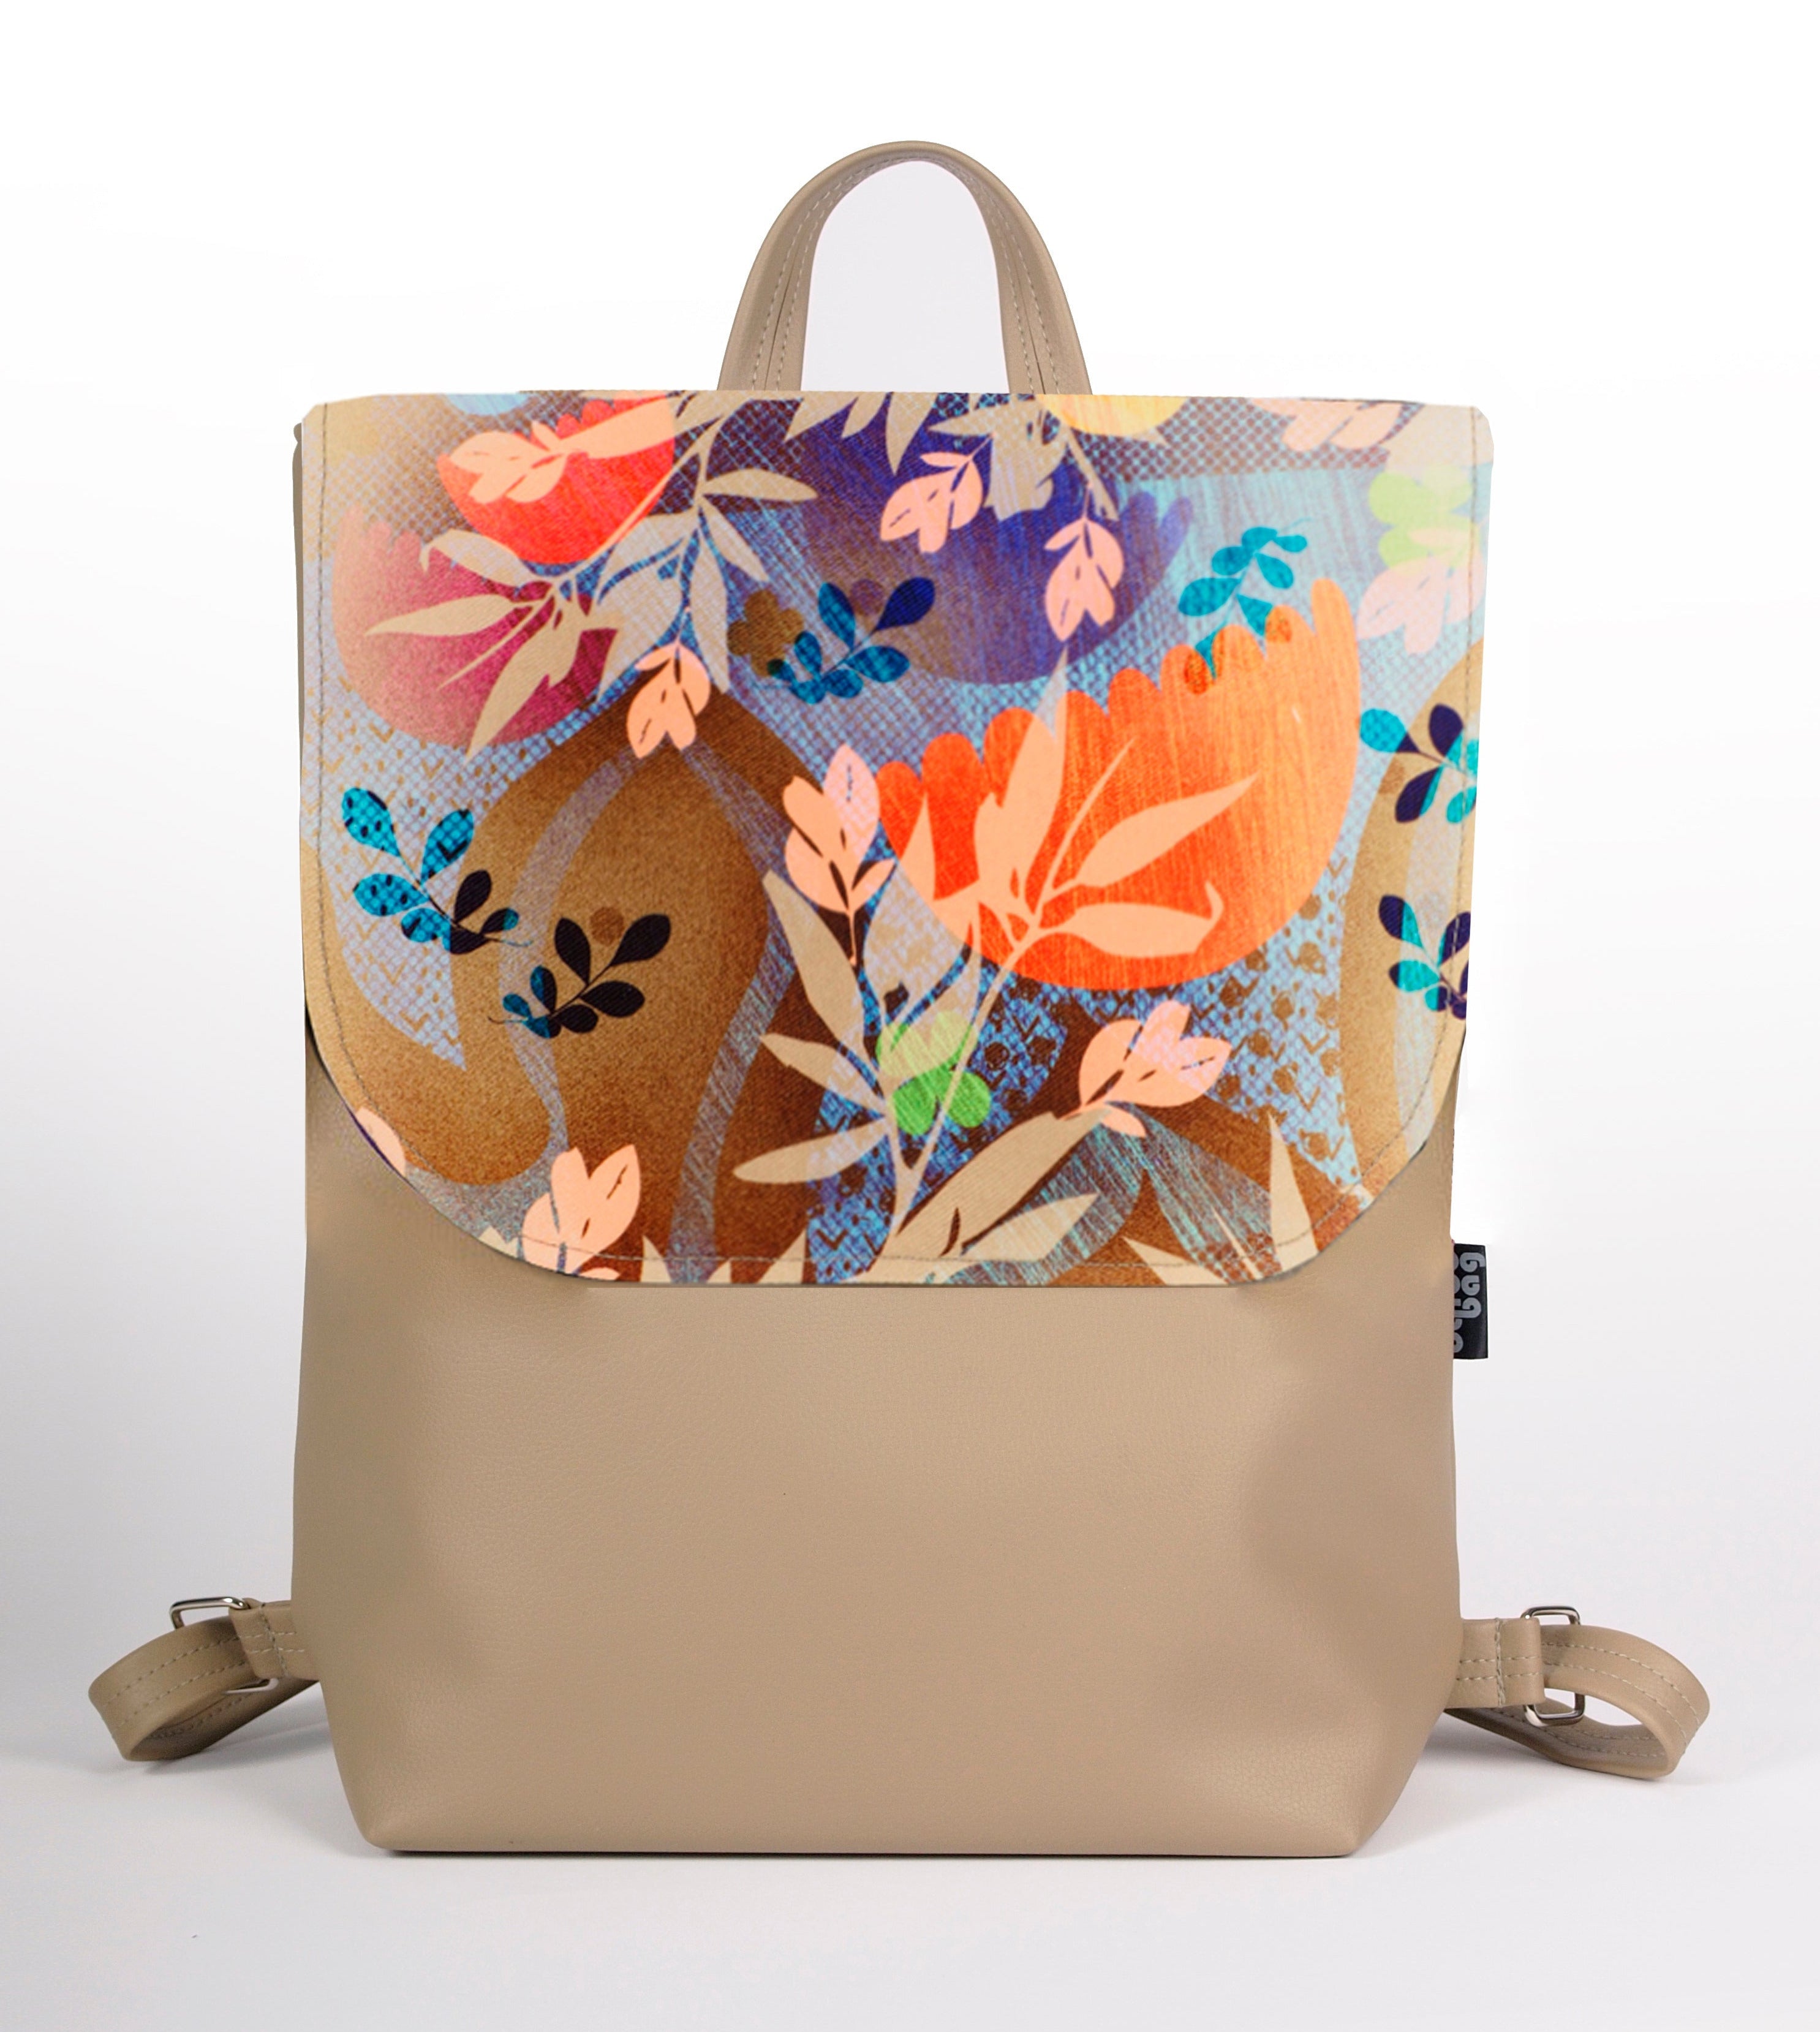 Bardo backpack large - Summer time - Premium backpack large from BARDO ART WORKS - Just lvbeige, brown, gift, handemade, natural, nature, painted patterns, spring, tablet, urban style, vegan leather, woman85.00! Shop now at BARDO ART WORKS